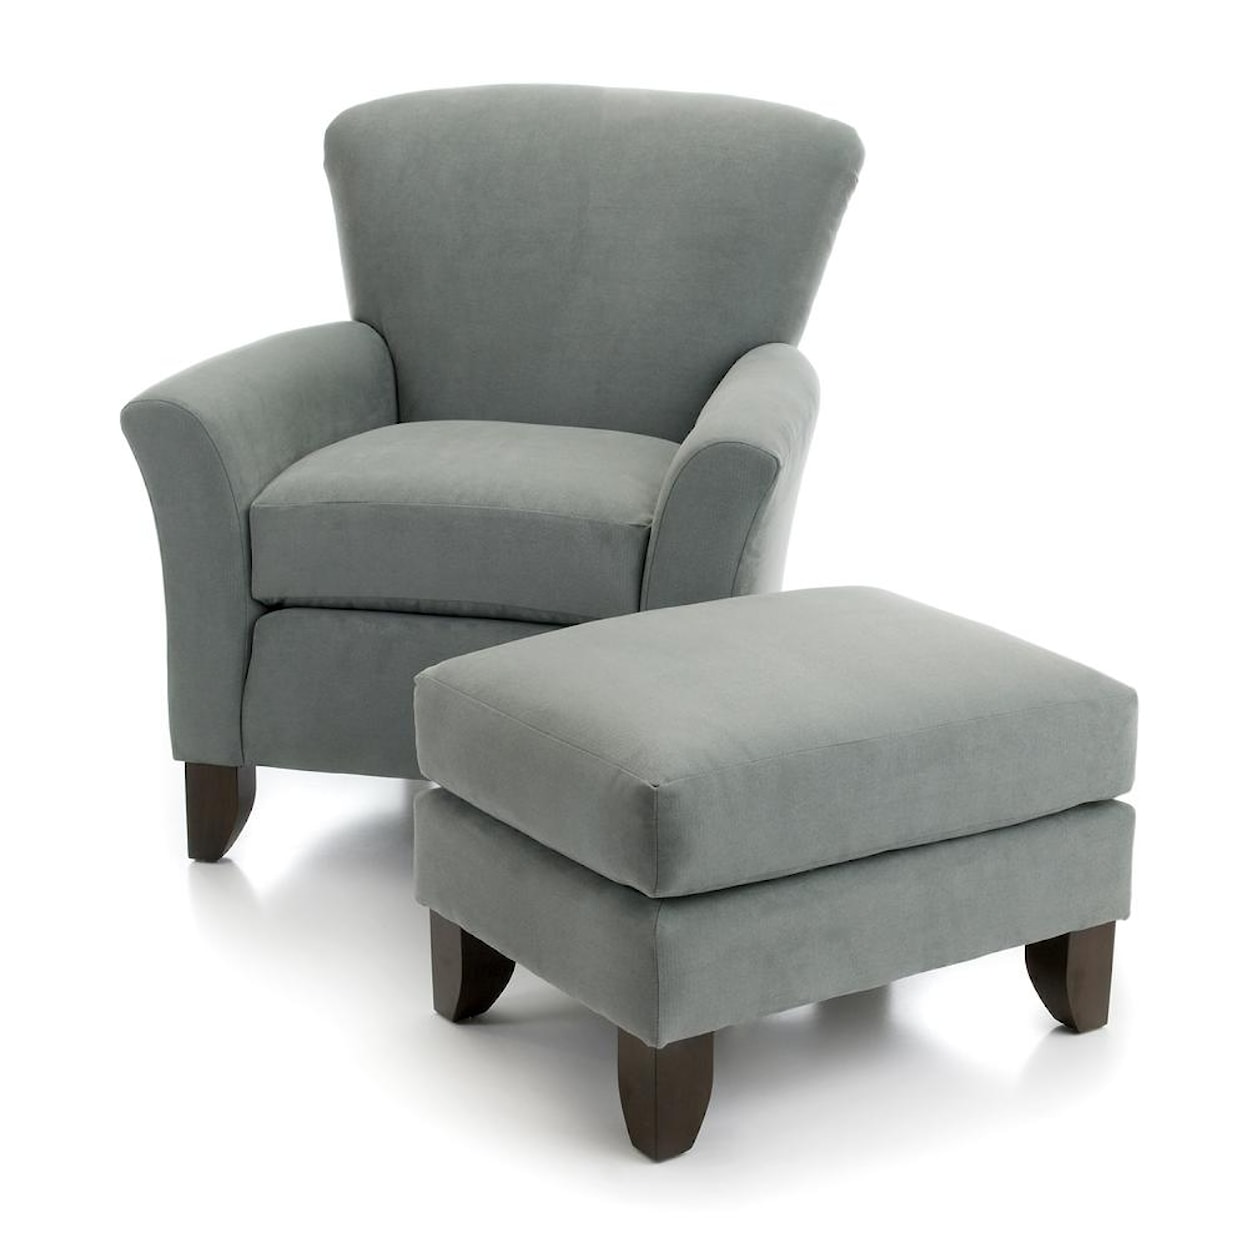 Smith Brothers 919 Upholstered Chair